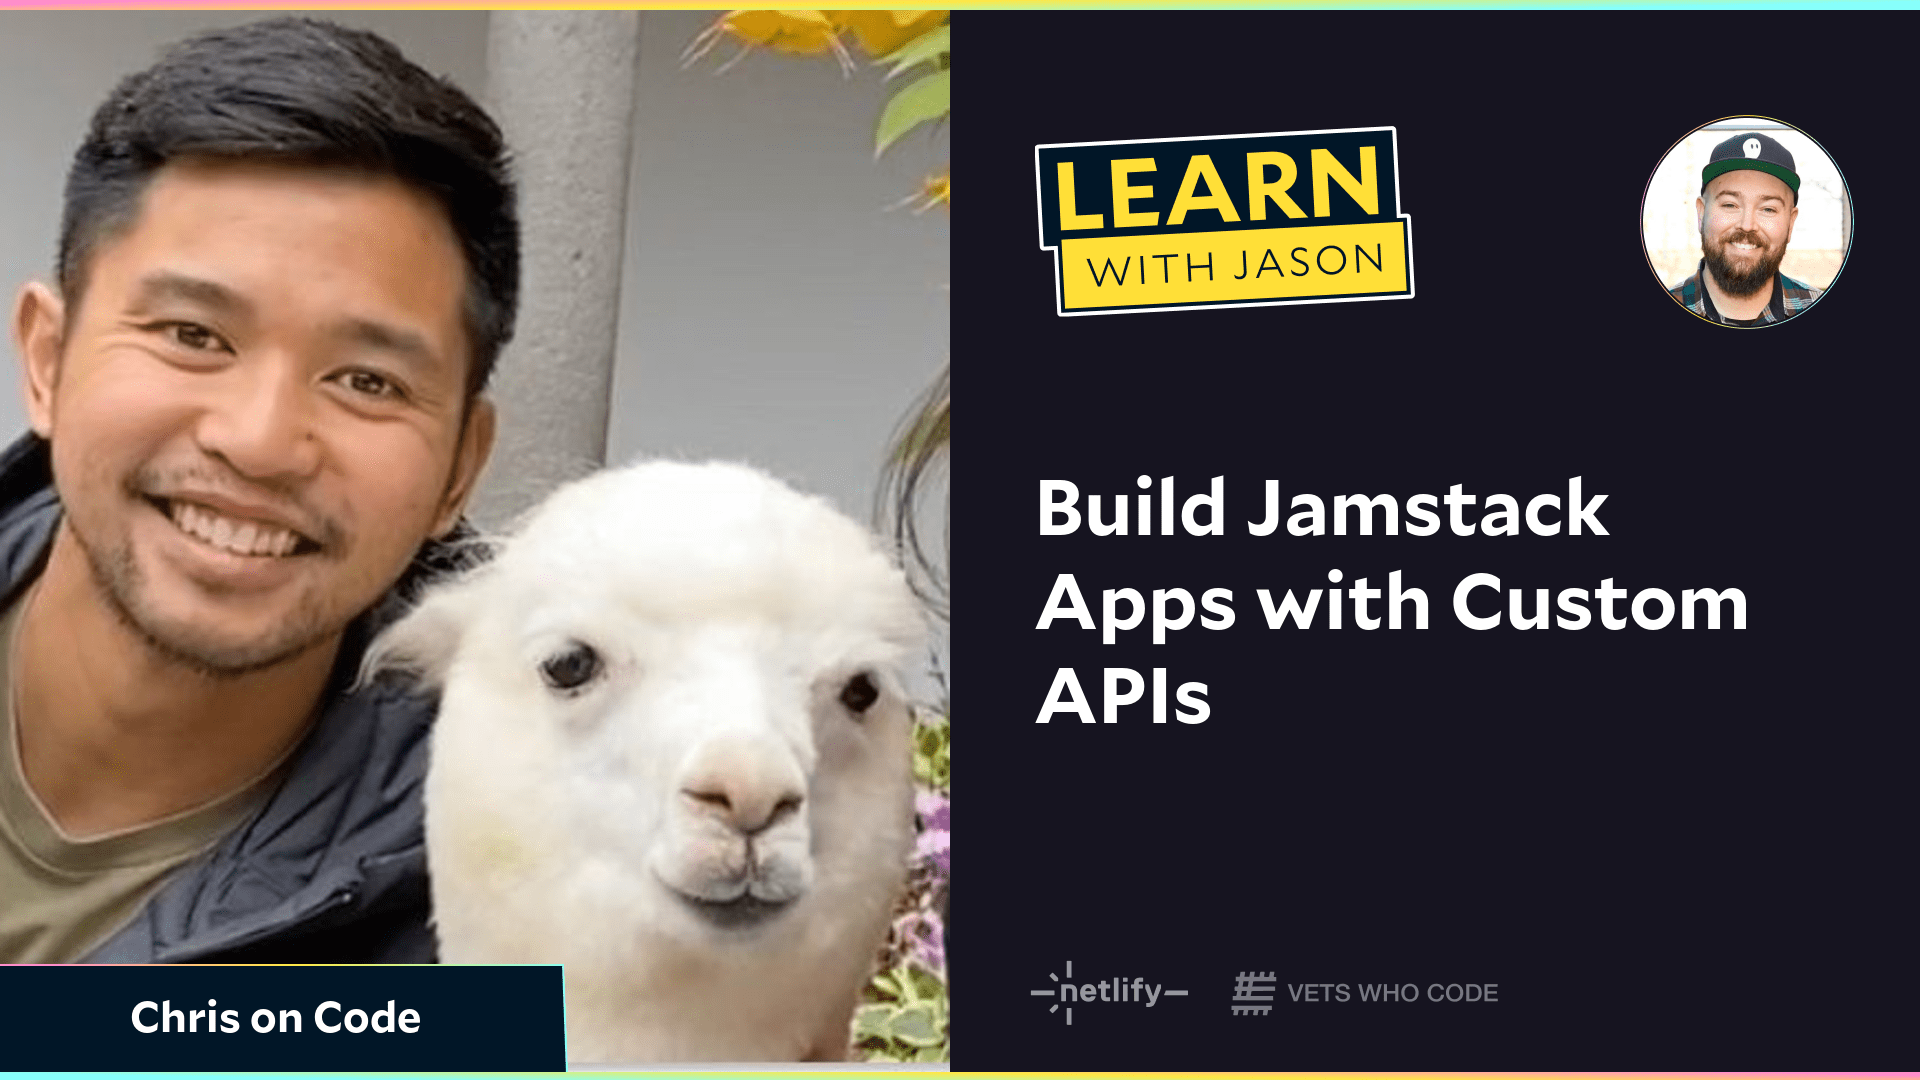 Build Jamstack Apps with Custom APIs (with Chris on Code)